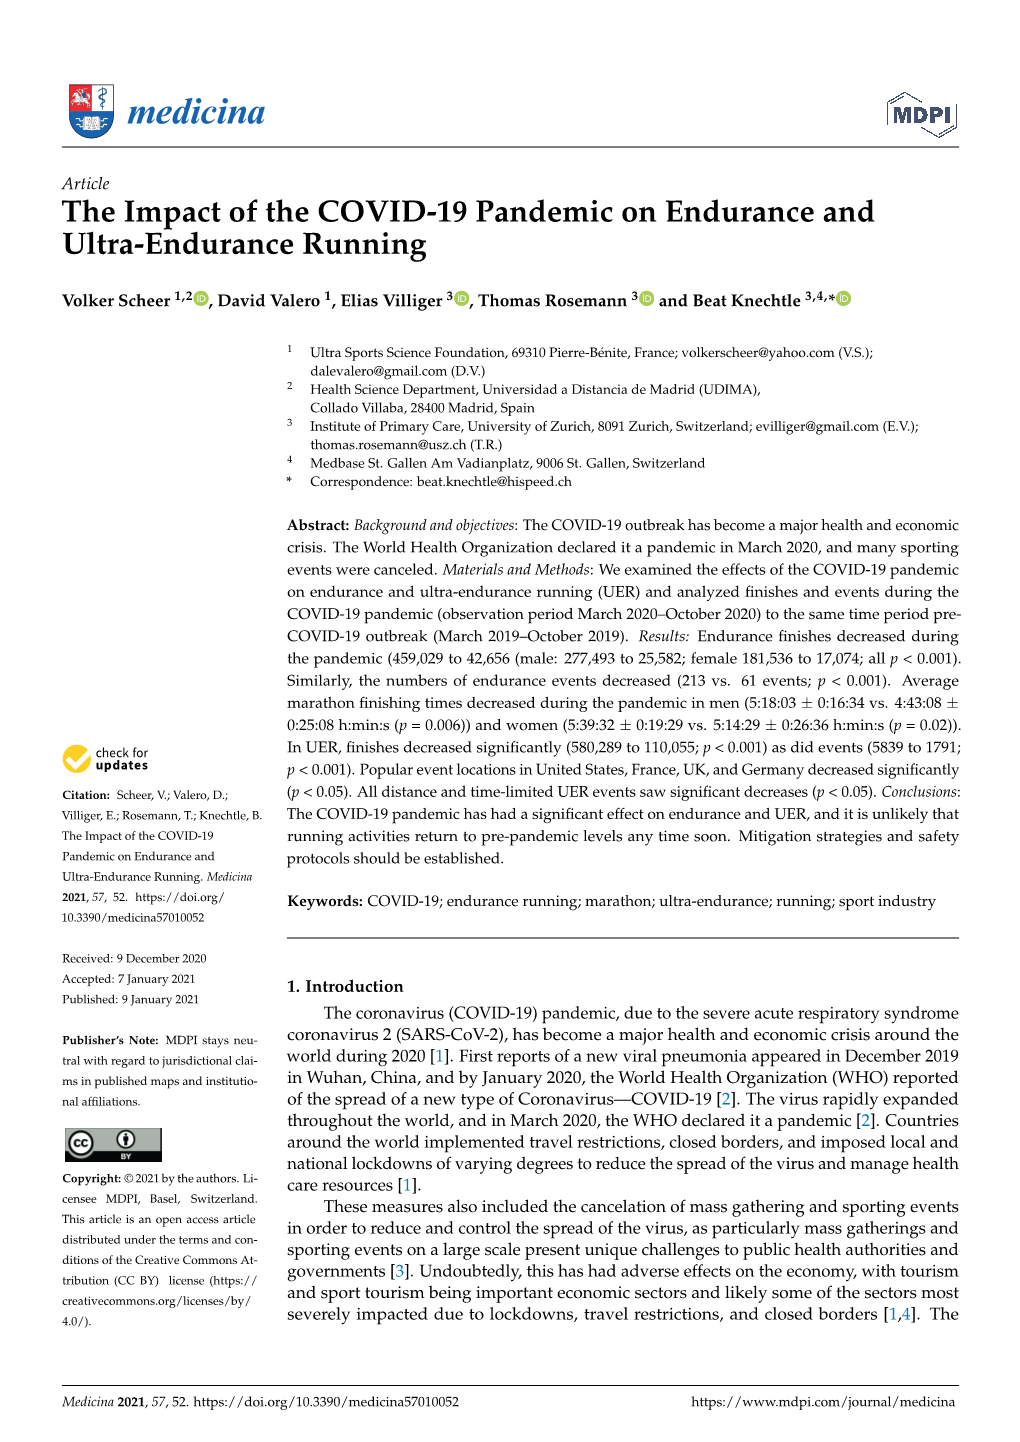 The Impact of the COVID-19 Pandemic on Endurance and Ultra-Endurance Running